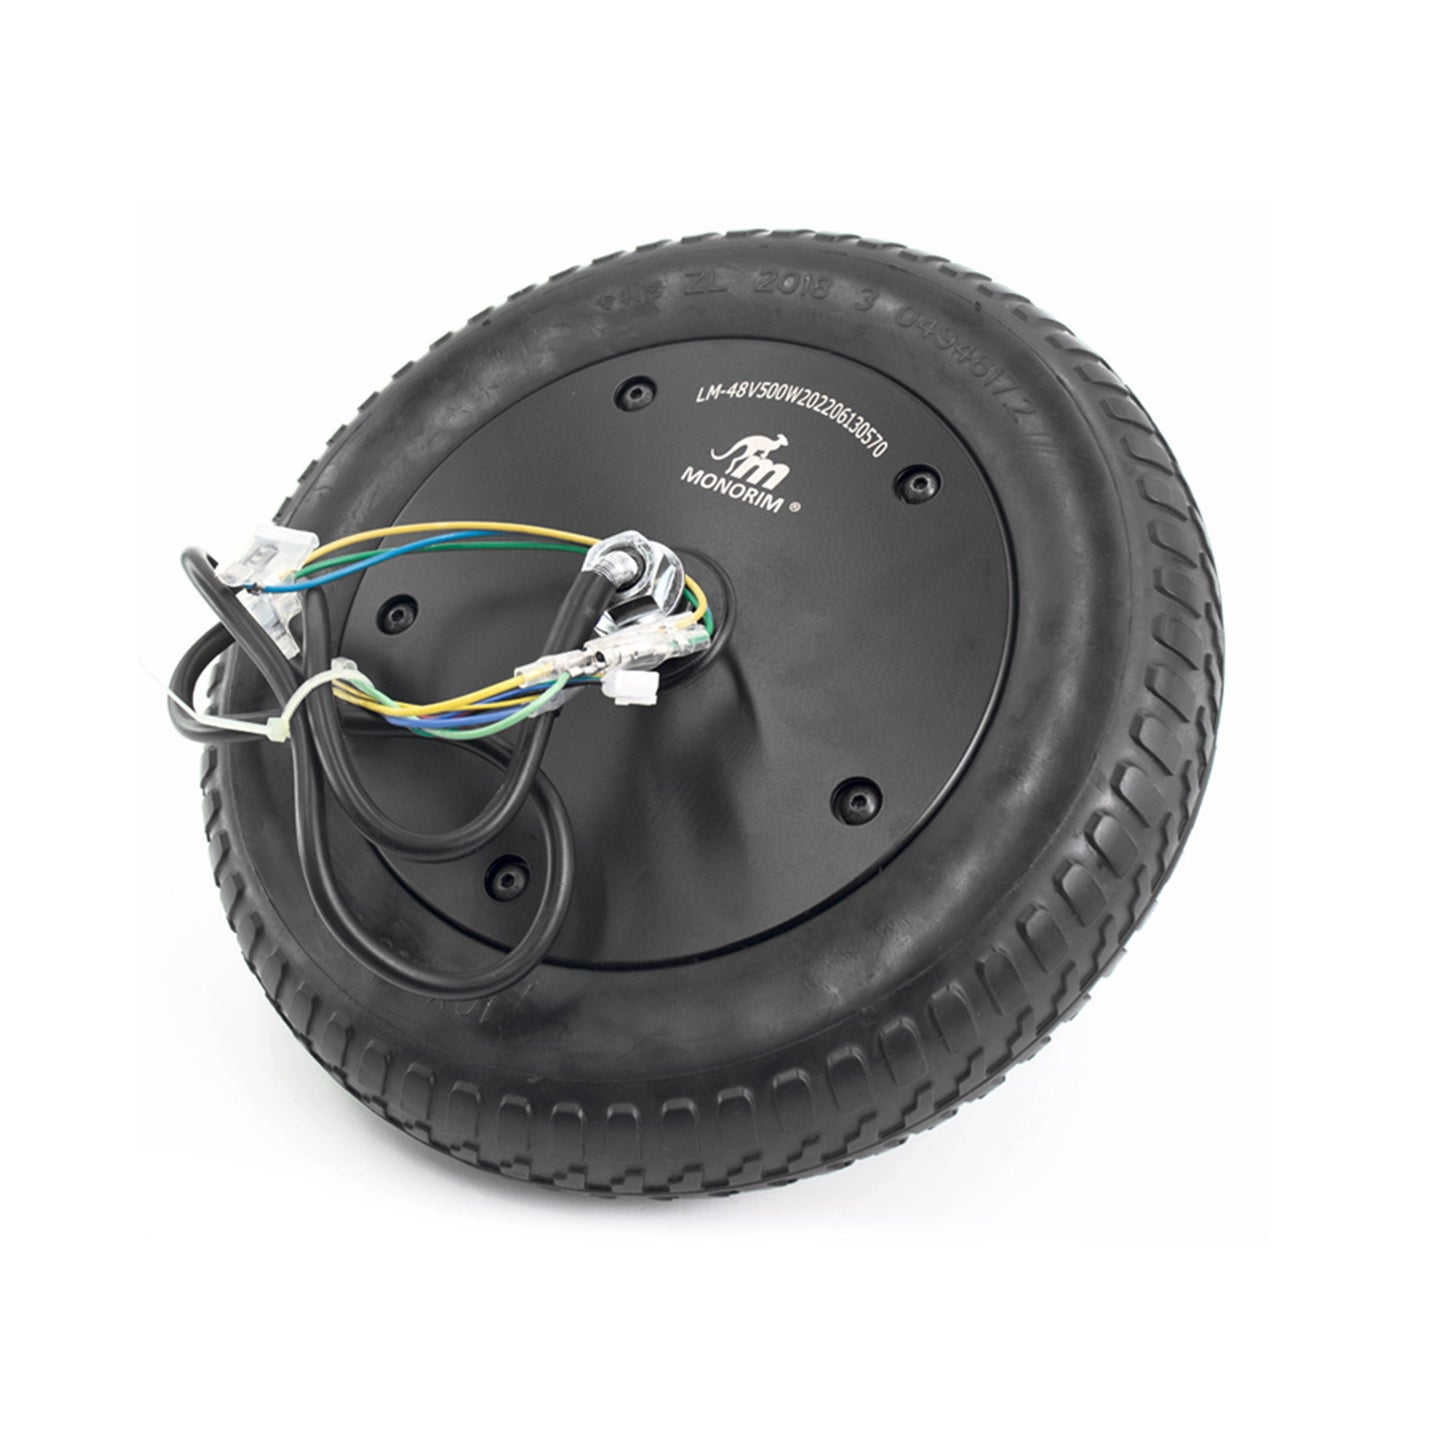 Monorim N9-2 For T0s /T0s_R/T2s  origina controller）Scooter Motor High Torque Motor 48v 500w Explosion-proof tire fixed wheel